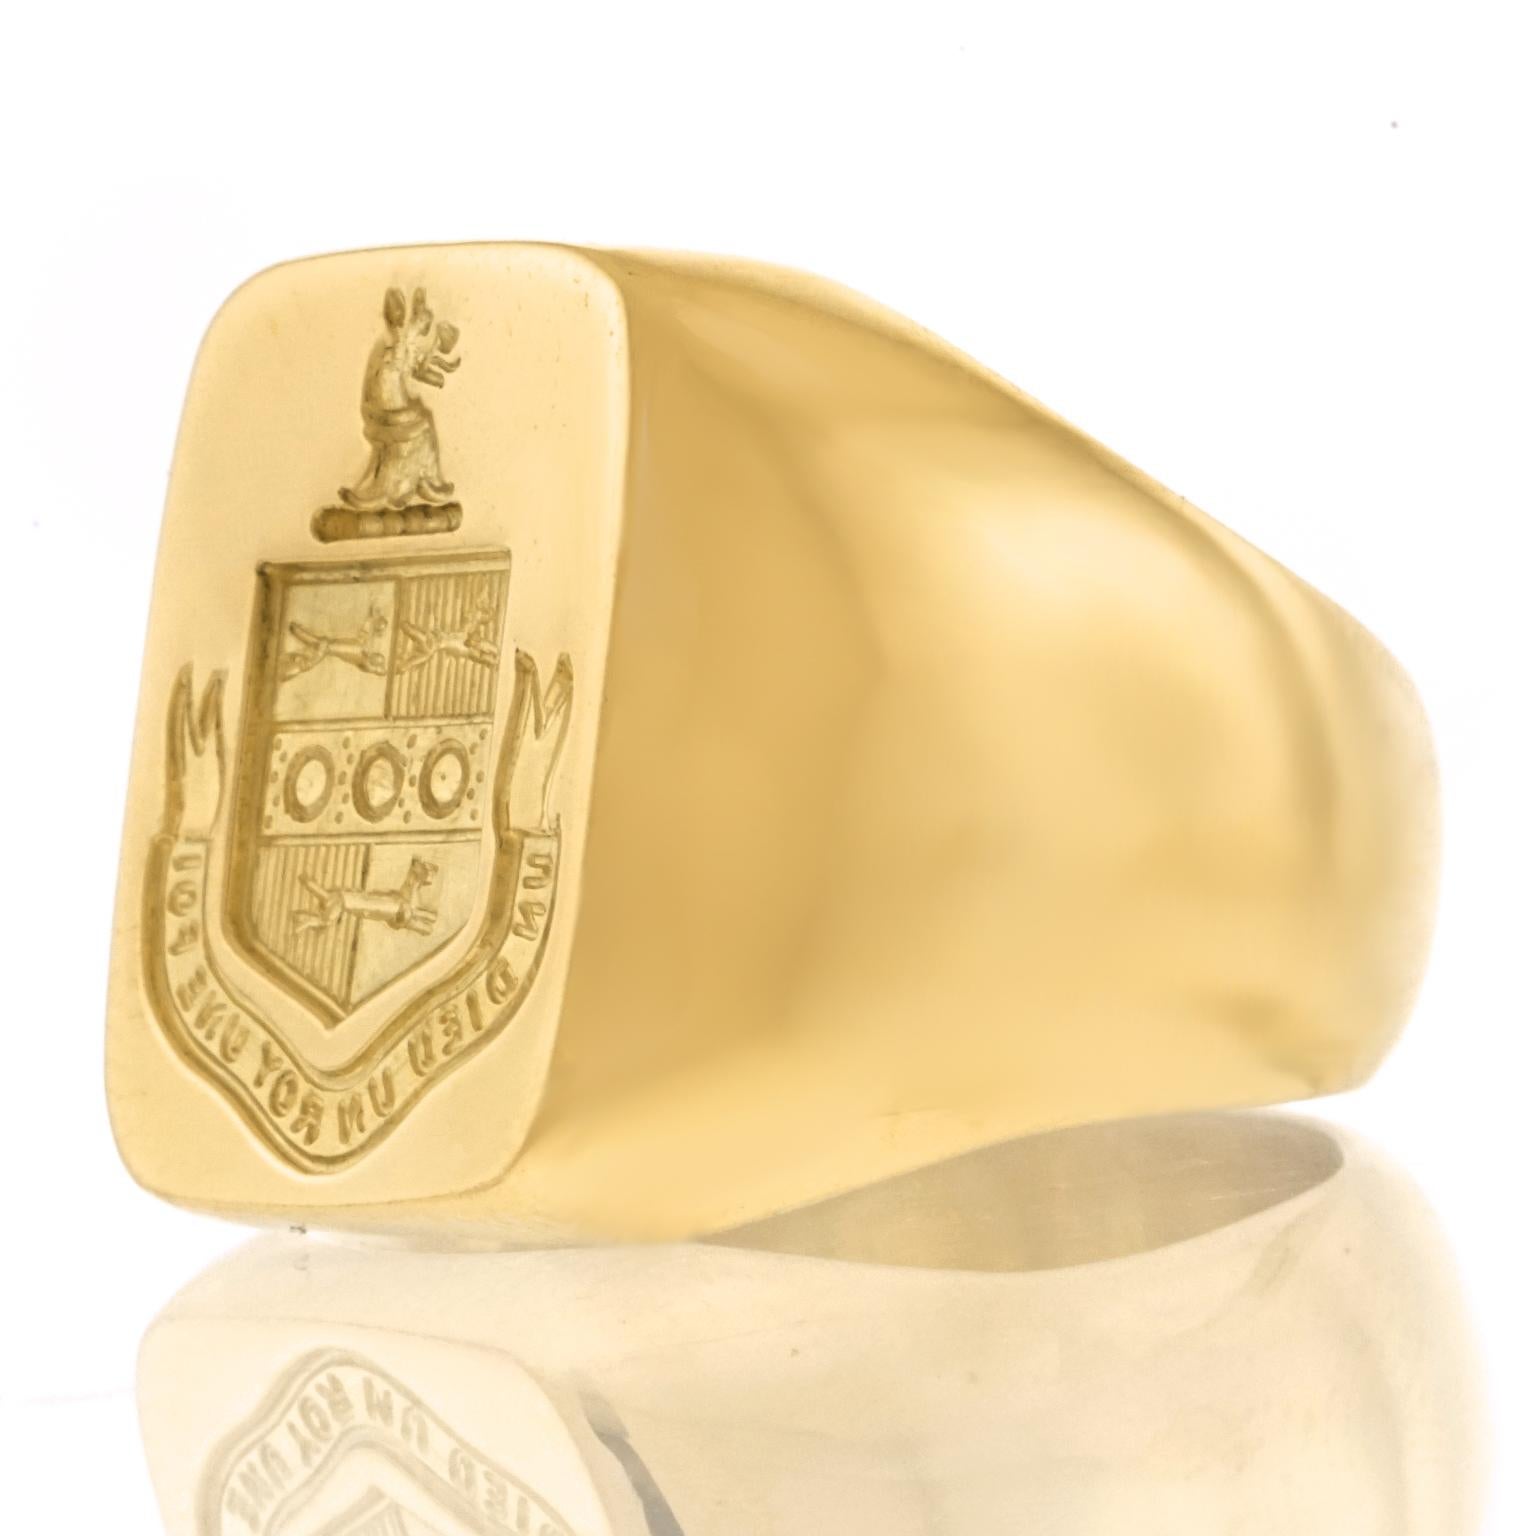 tiffany & co. gold signet ring womens